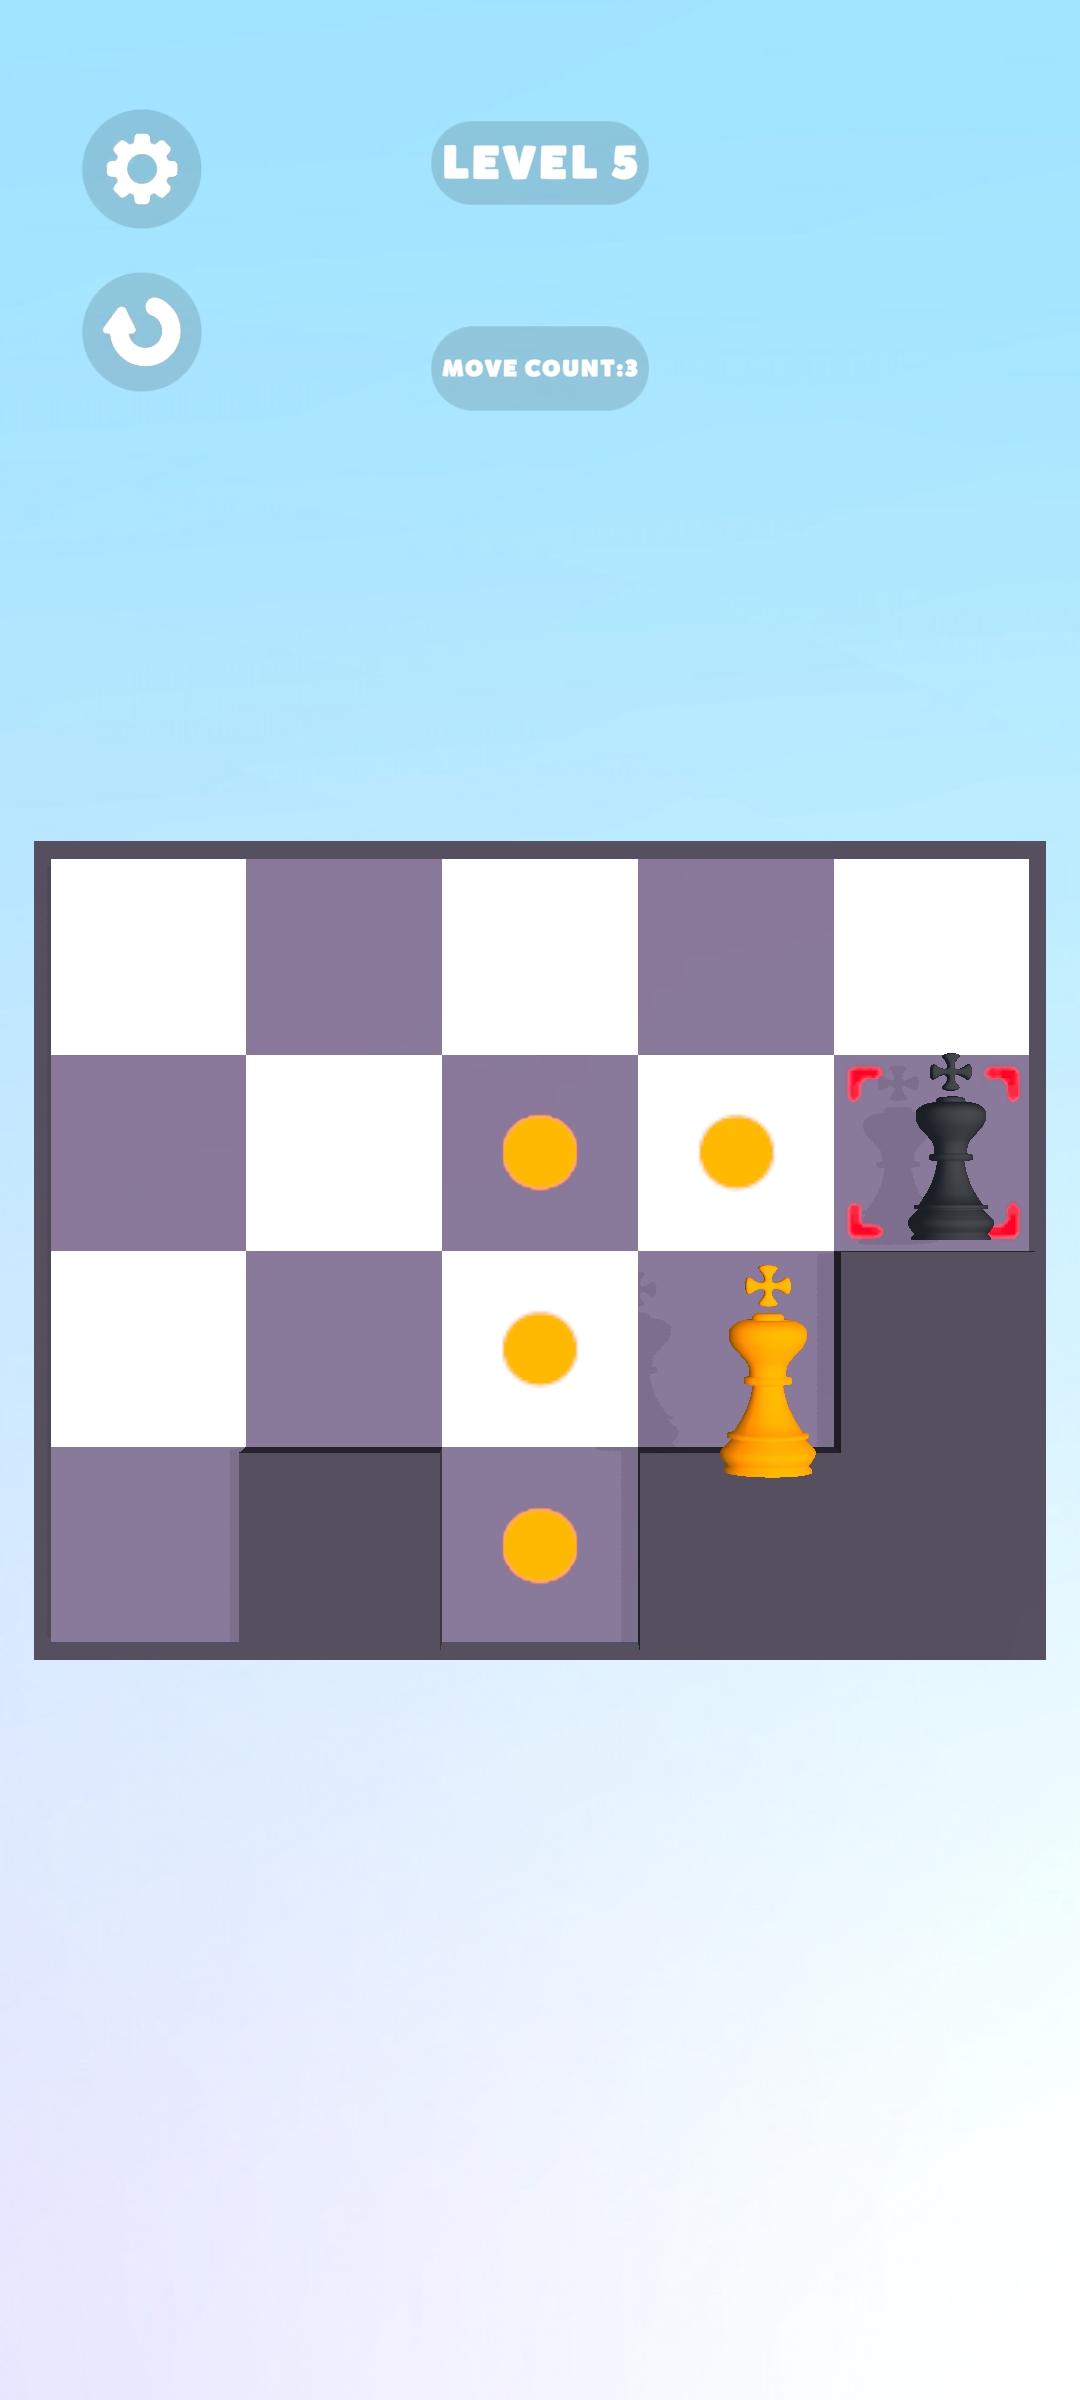 How to play Chessle 